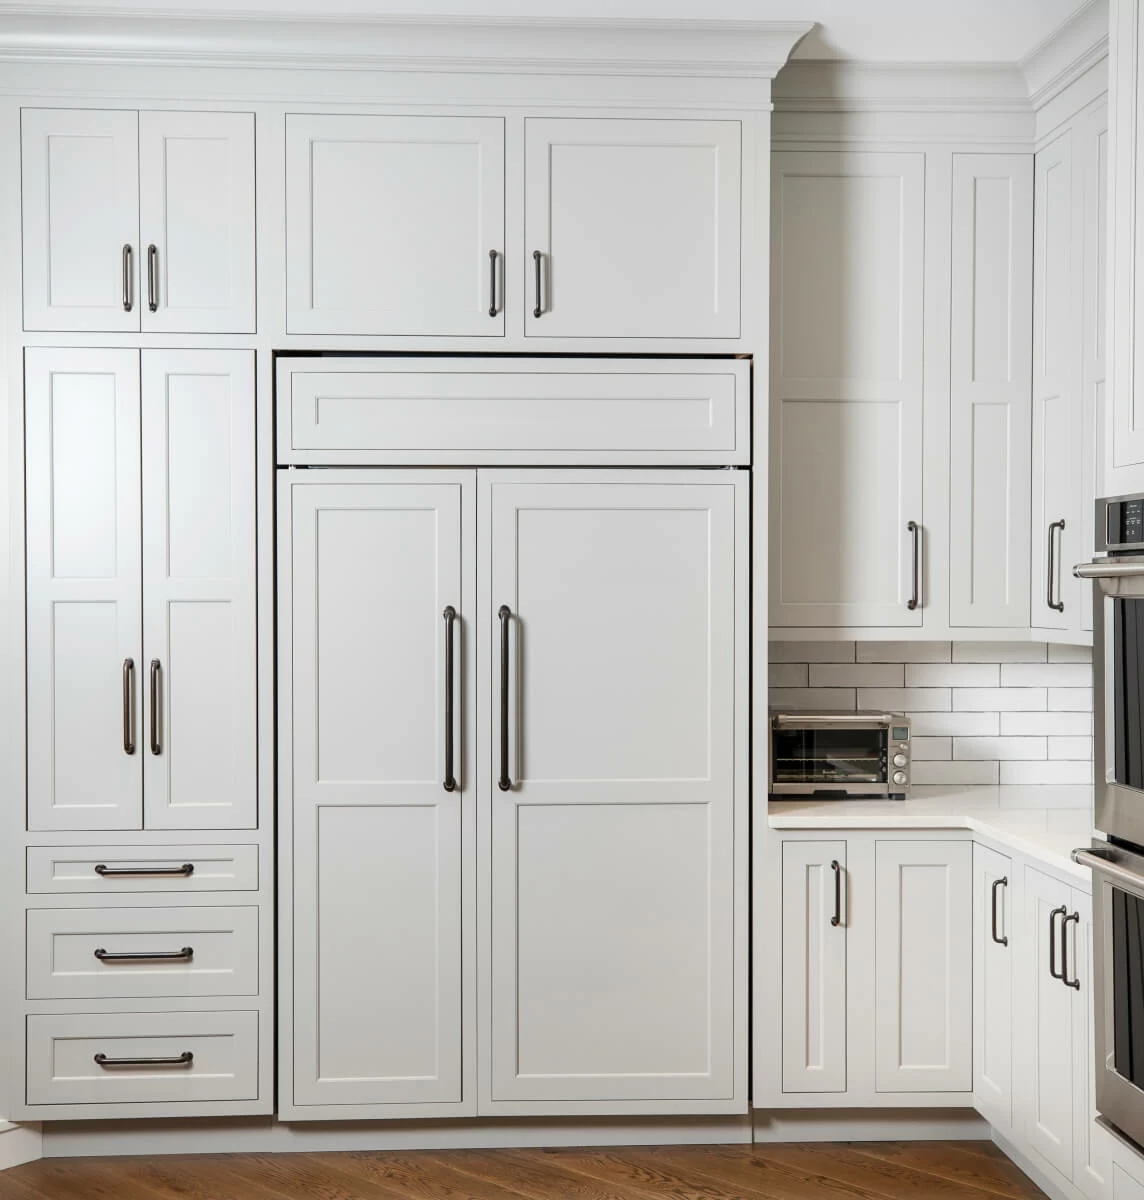 How To Hide Your Refrigerator In Plain Sight With Appliance Panels Dura Supreme Cabinetry